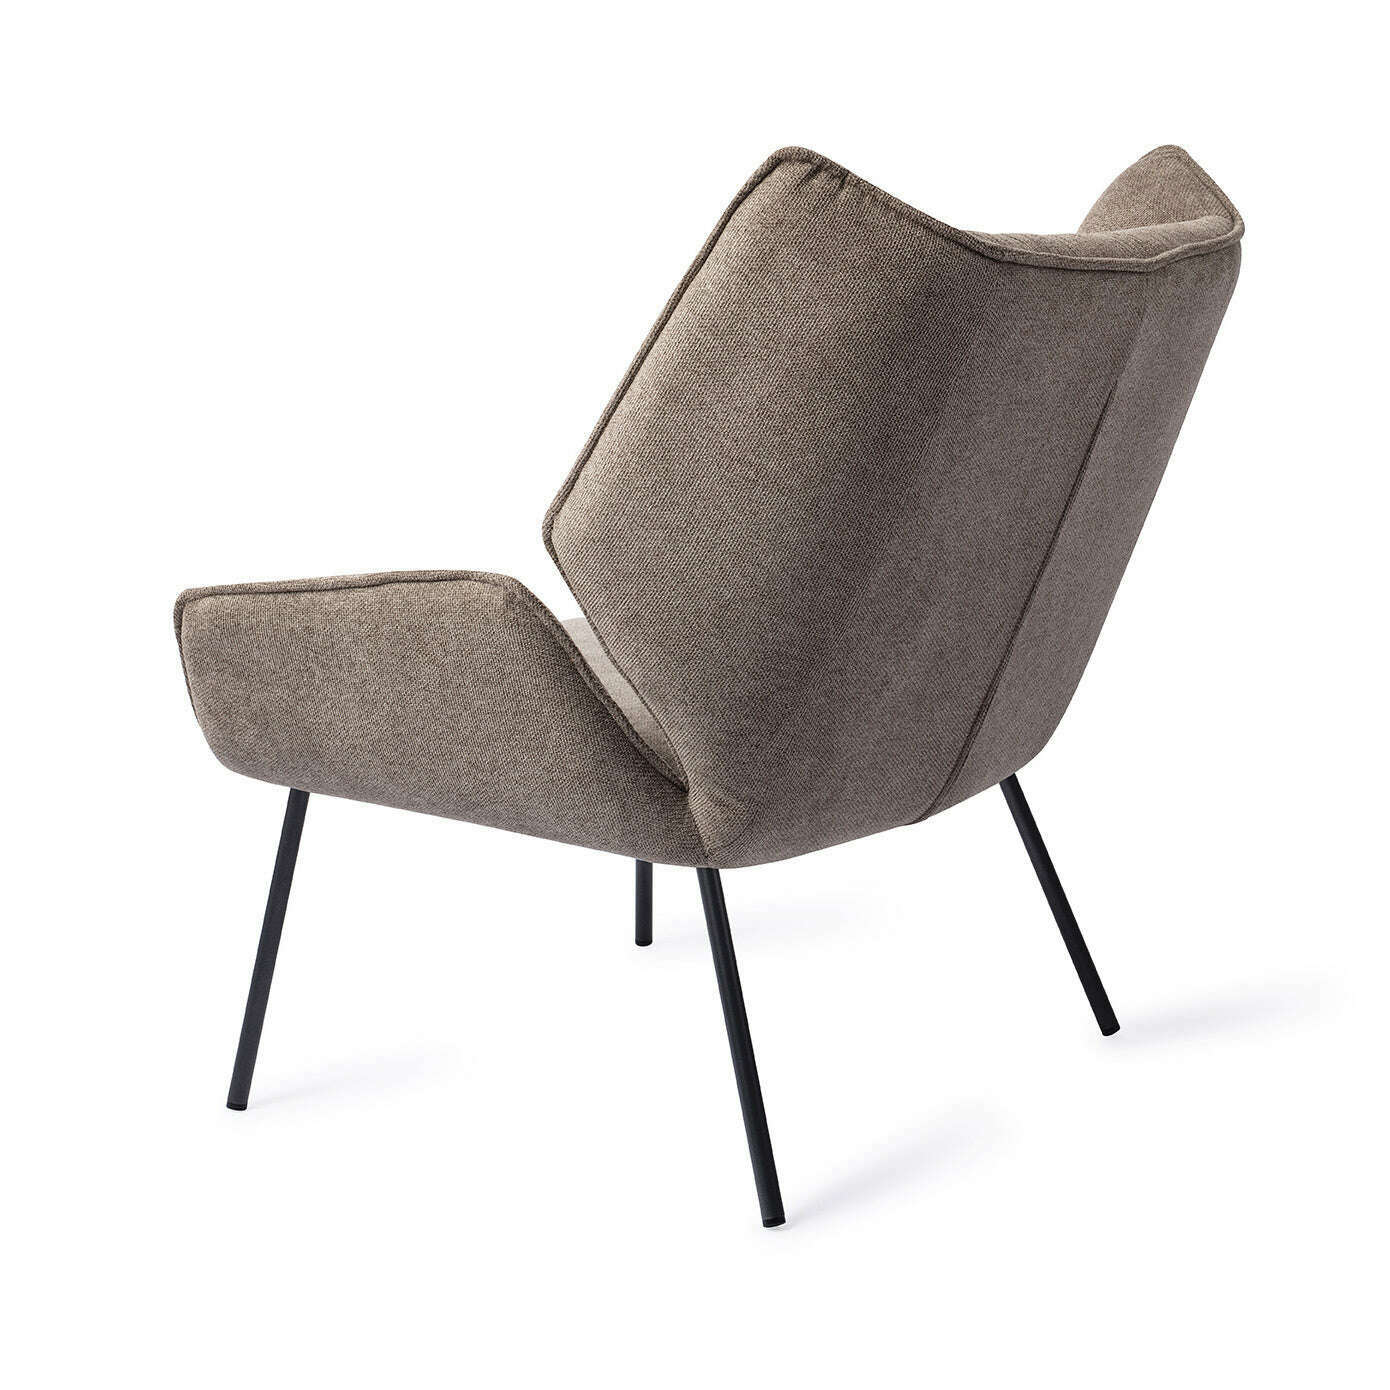 Jesper Home Haruno fauteuil taupy toffee